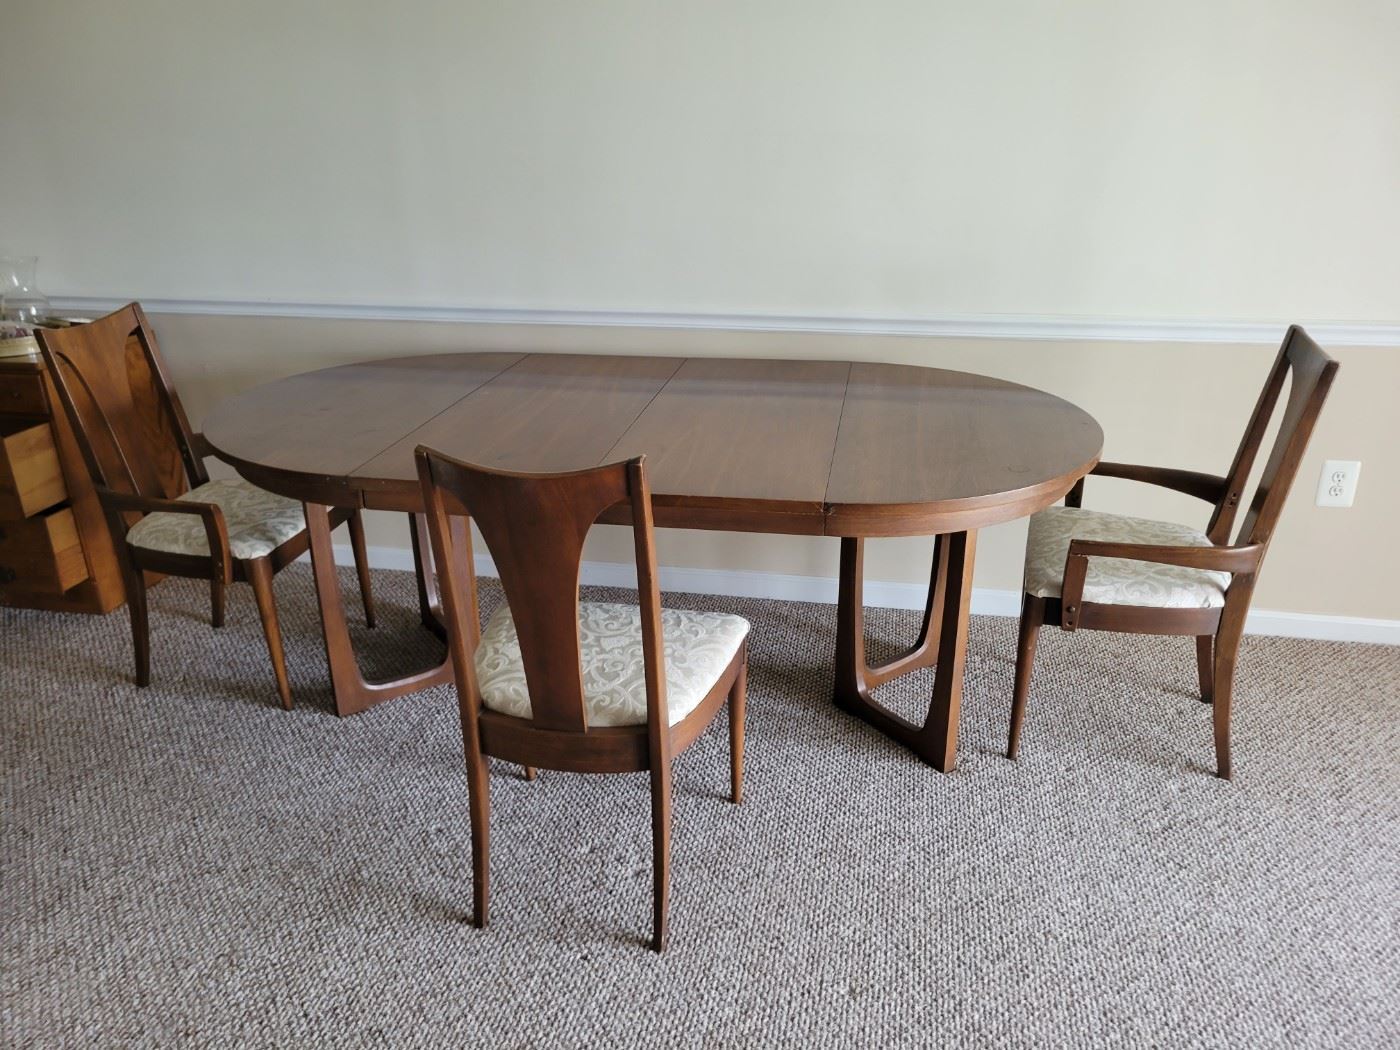 Table is 80" Length x 44" Width x 29" Height 